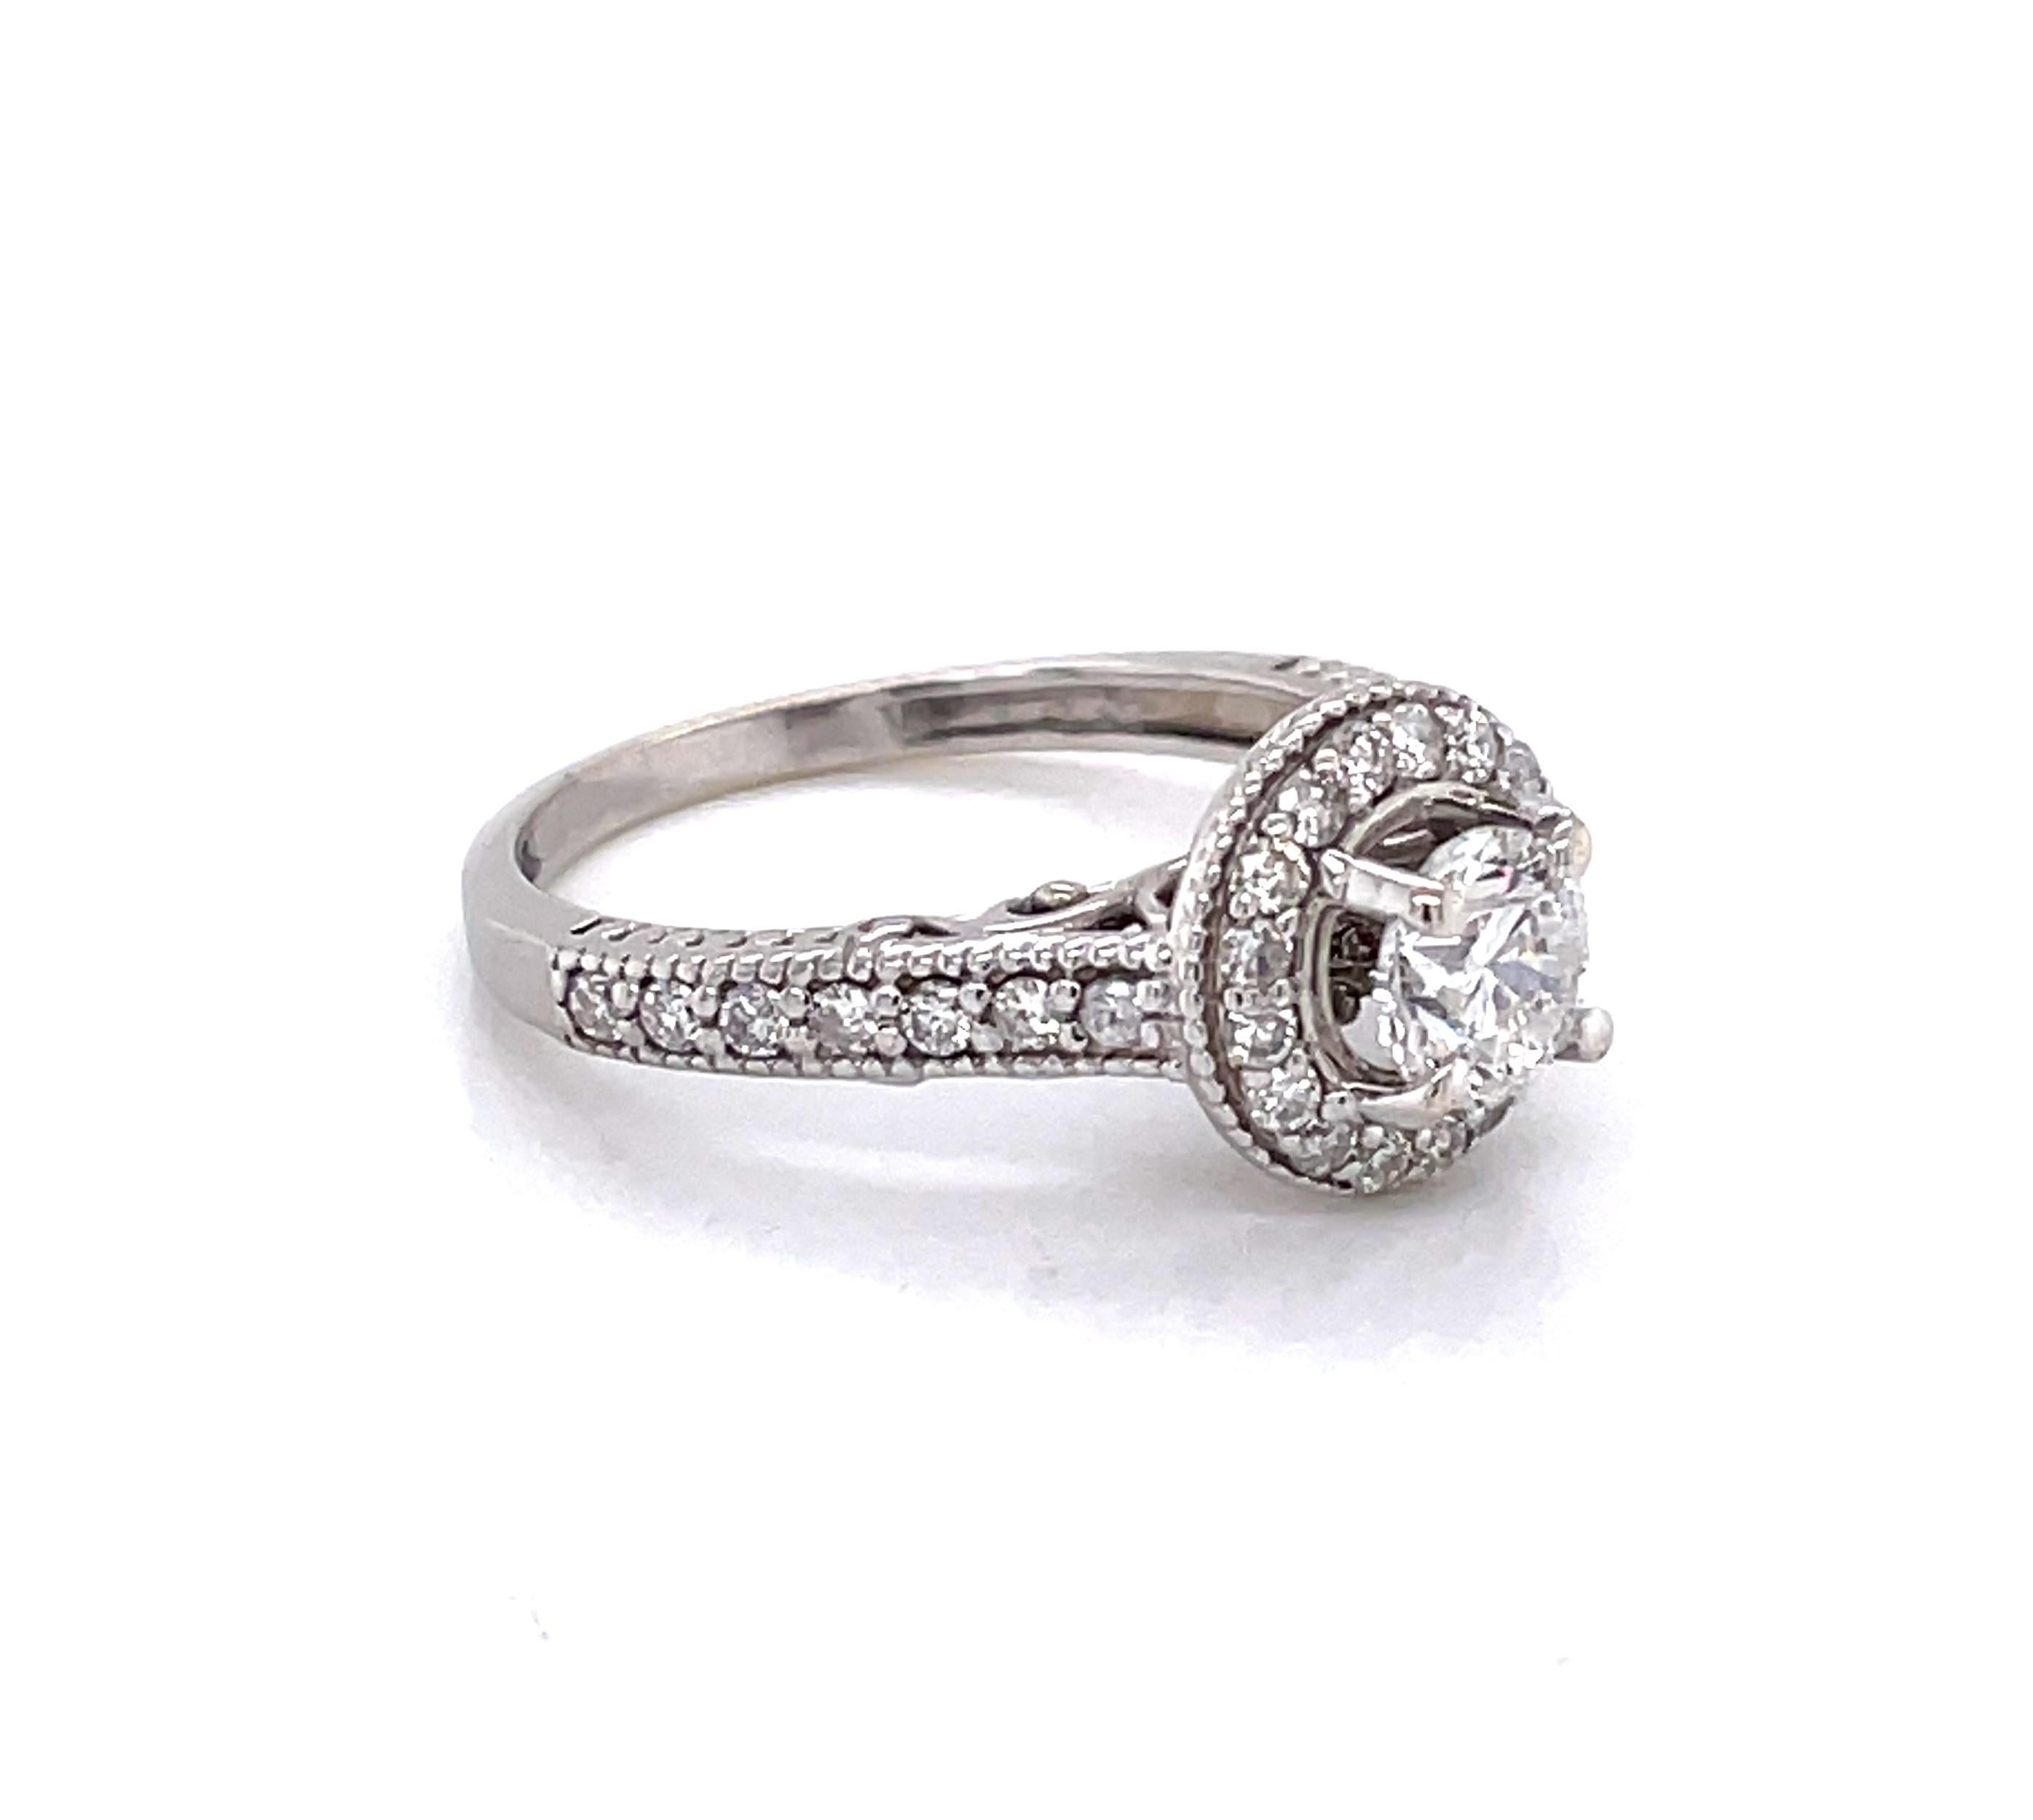 Diamond Halo 14 Karat White Gold Engagement Ring In Excellent Condition For Sale In Mount Kisco, NY